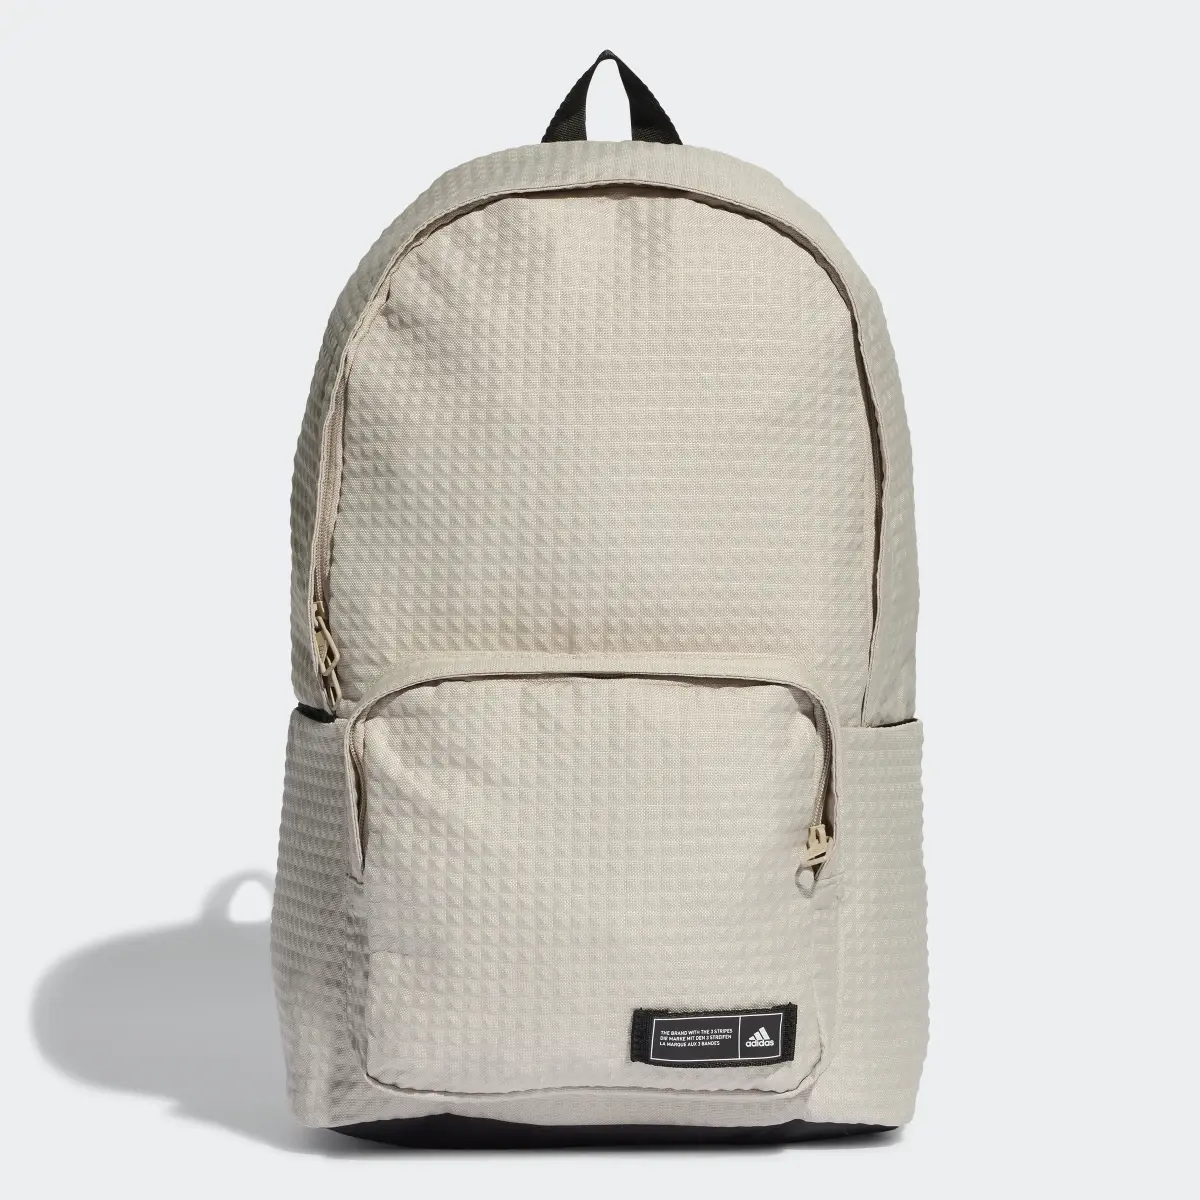 Adidas Classic Foundation Backpack. 1